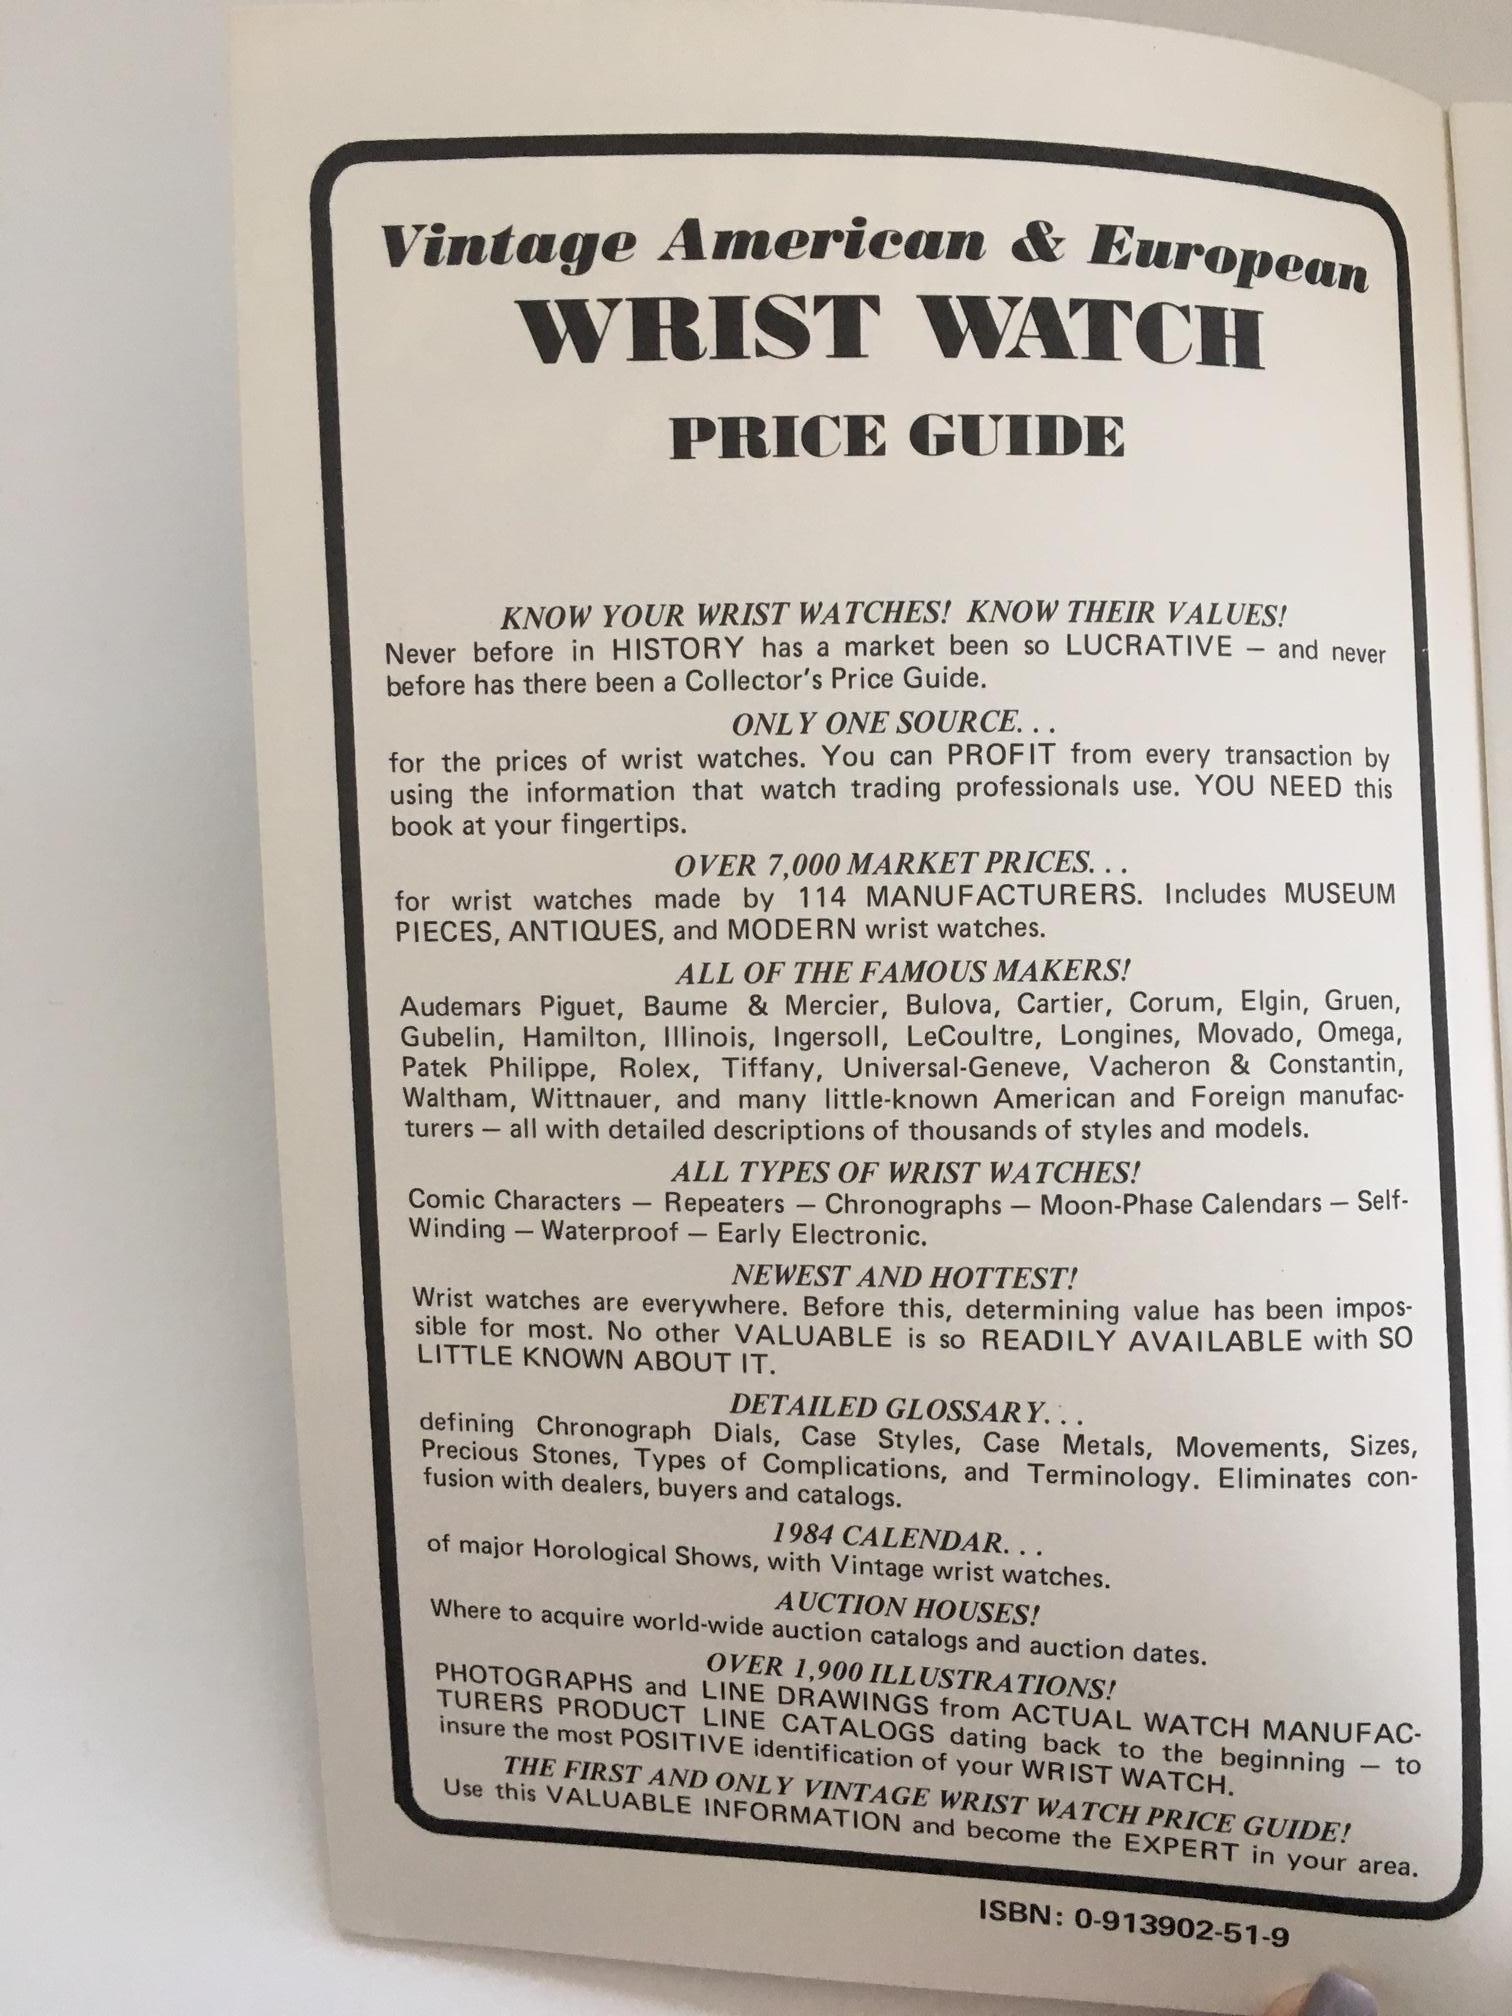 Vintage American & European Wrist Watch guide by Sherry Ehrhardt & Peter Planes - First Edition 